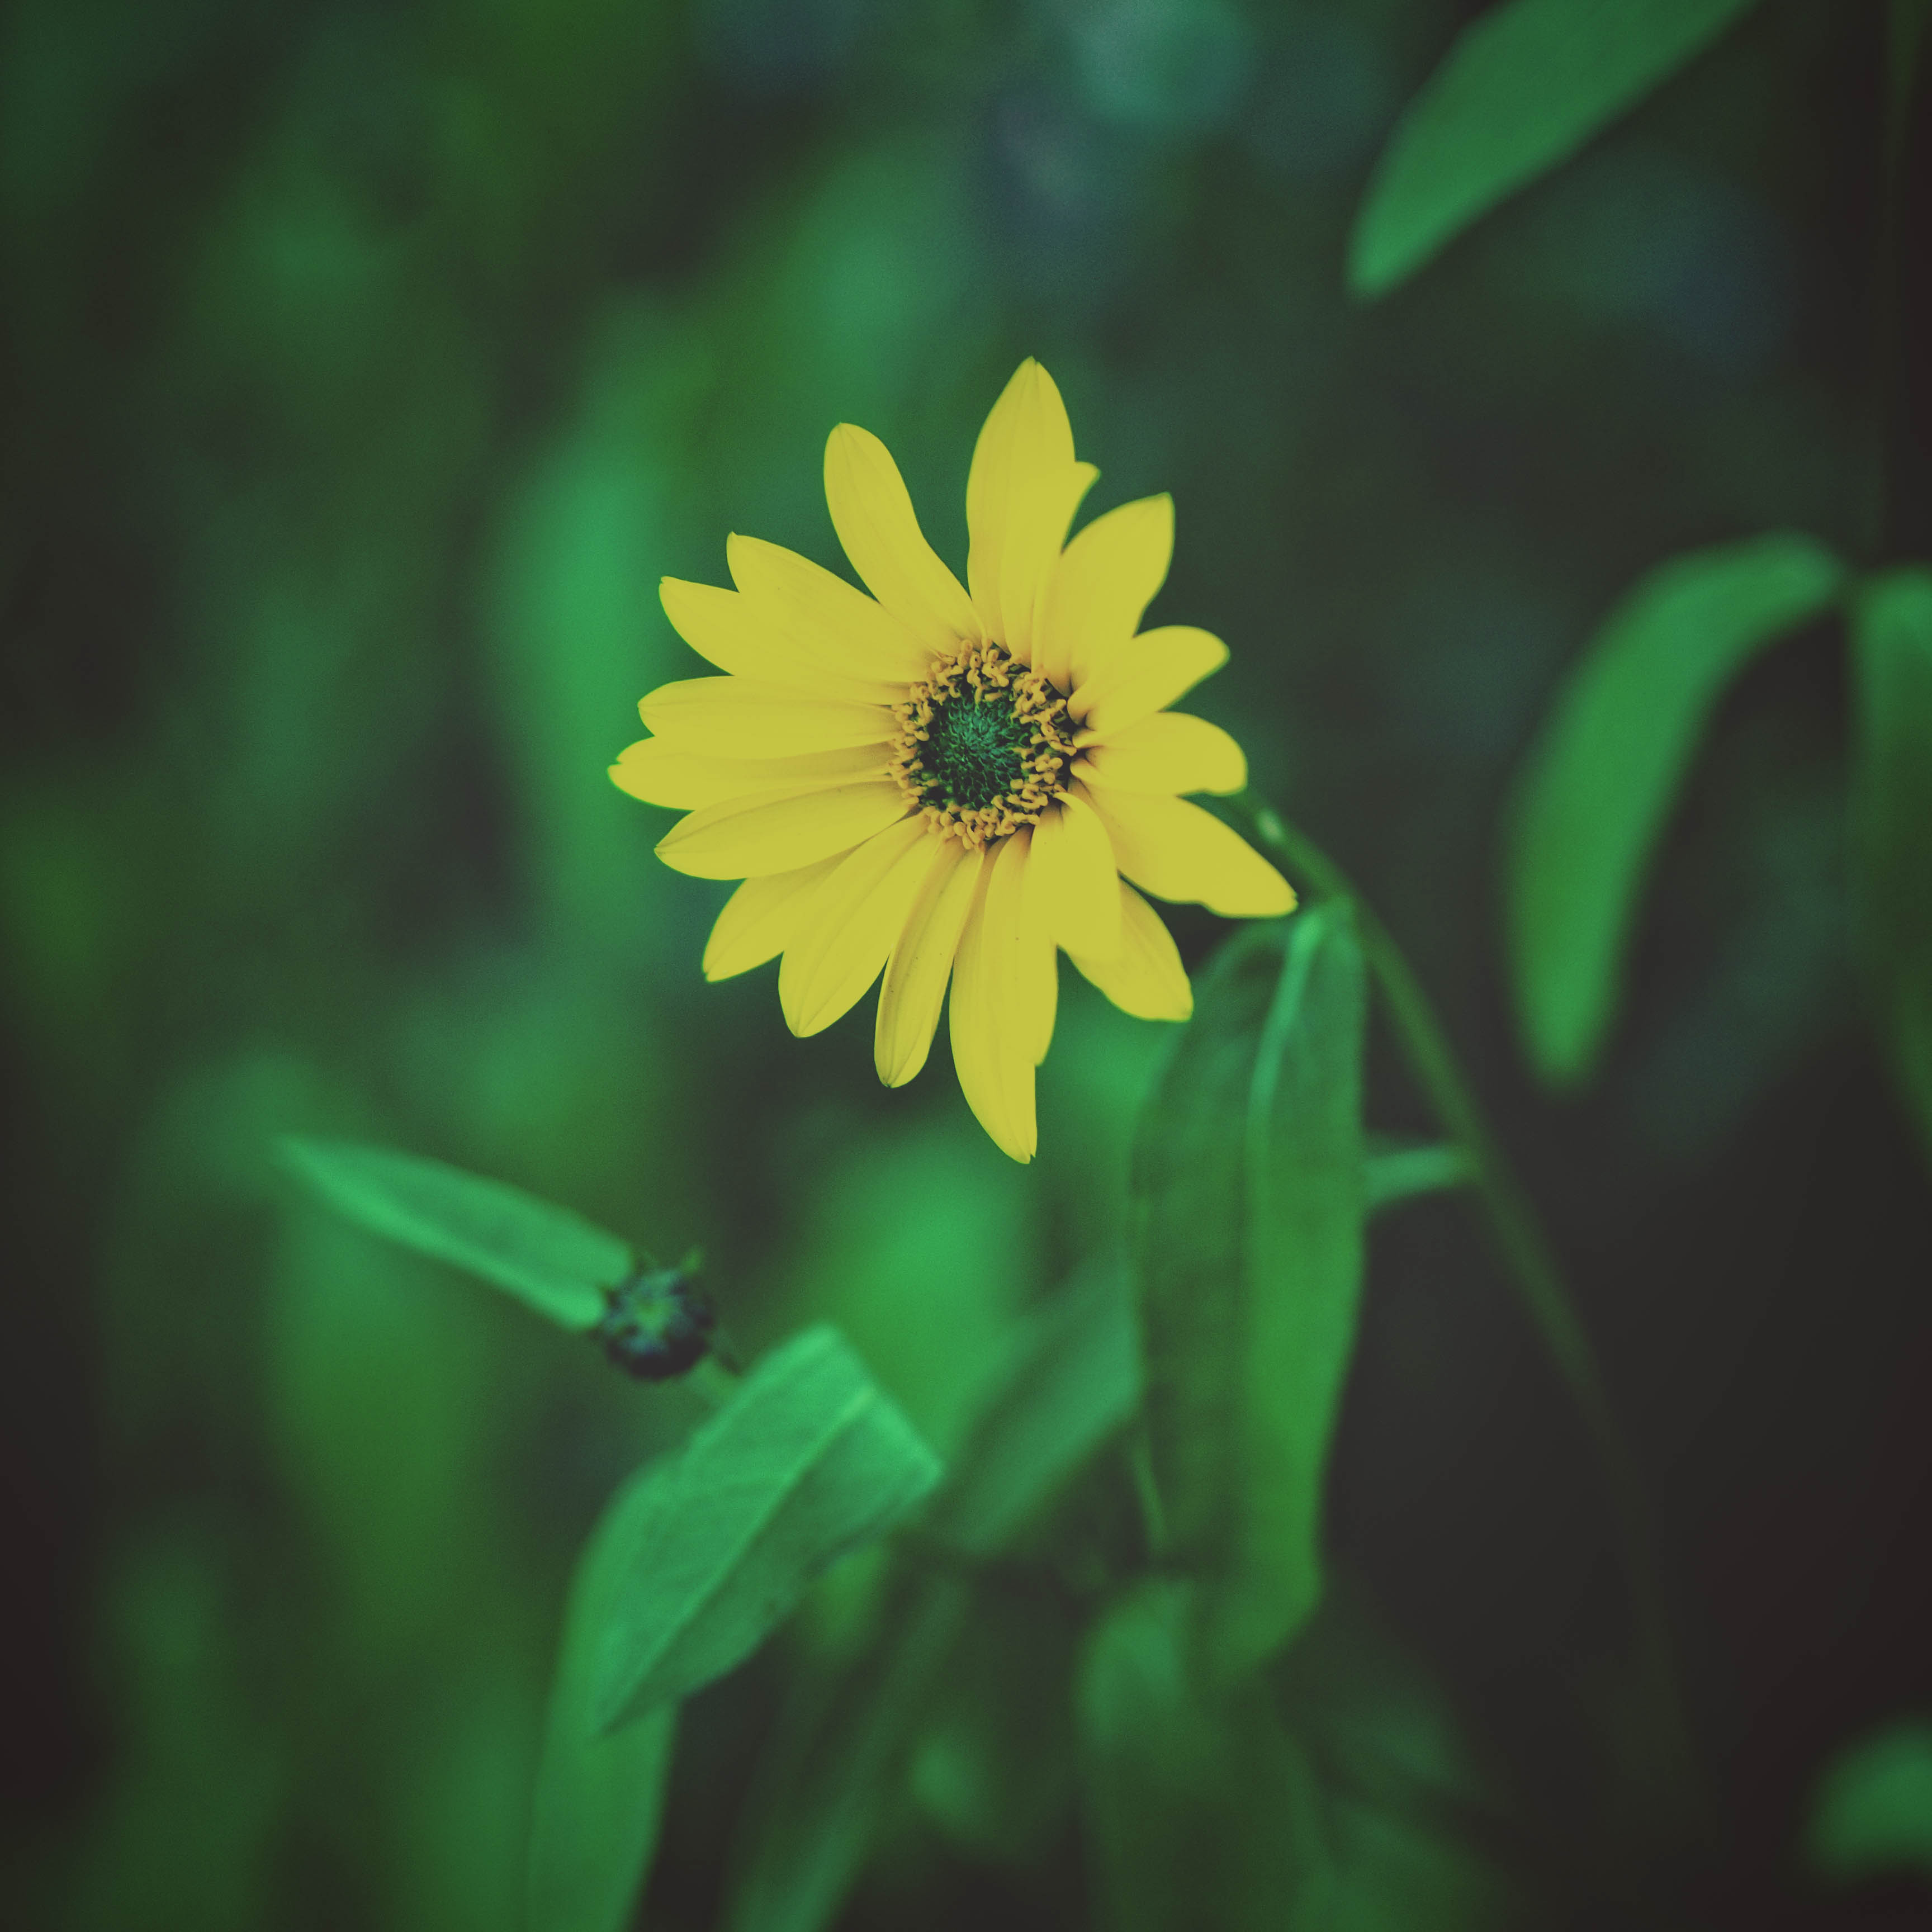 flowers, yellow, flower, blur, smooth, flower bed, flowerbed, foliage